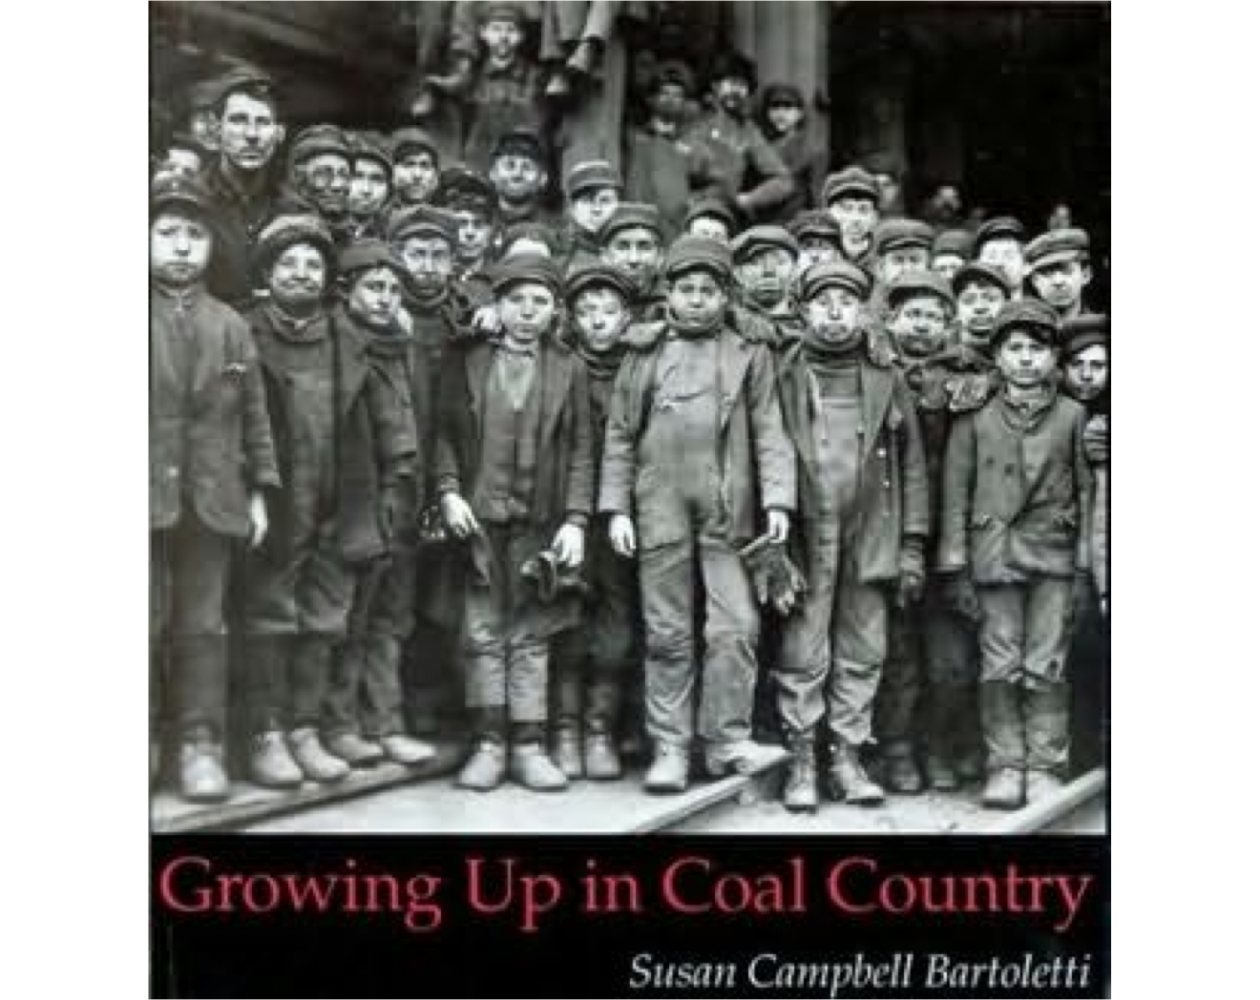 Rise+of+Child+Labor+During+the+Industrial+Age